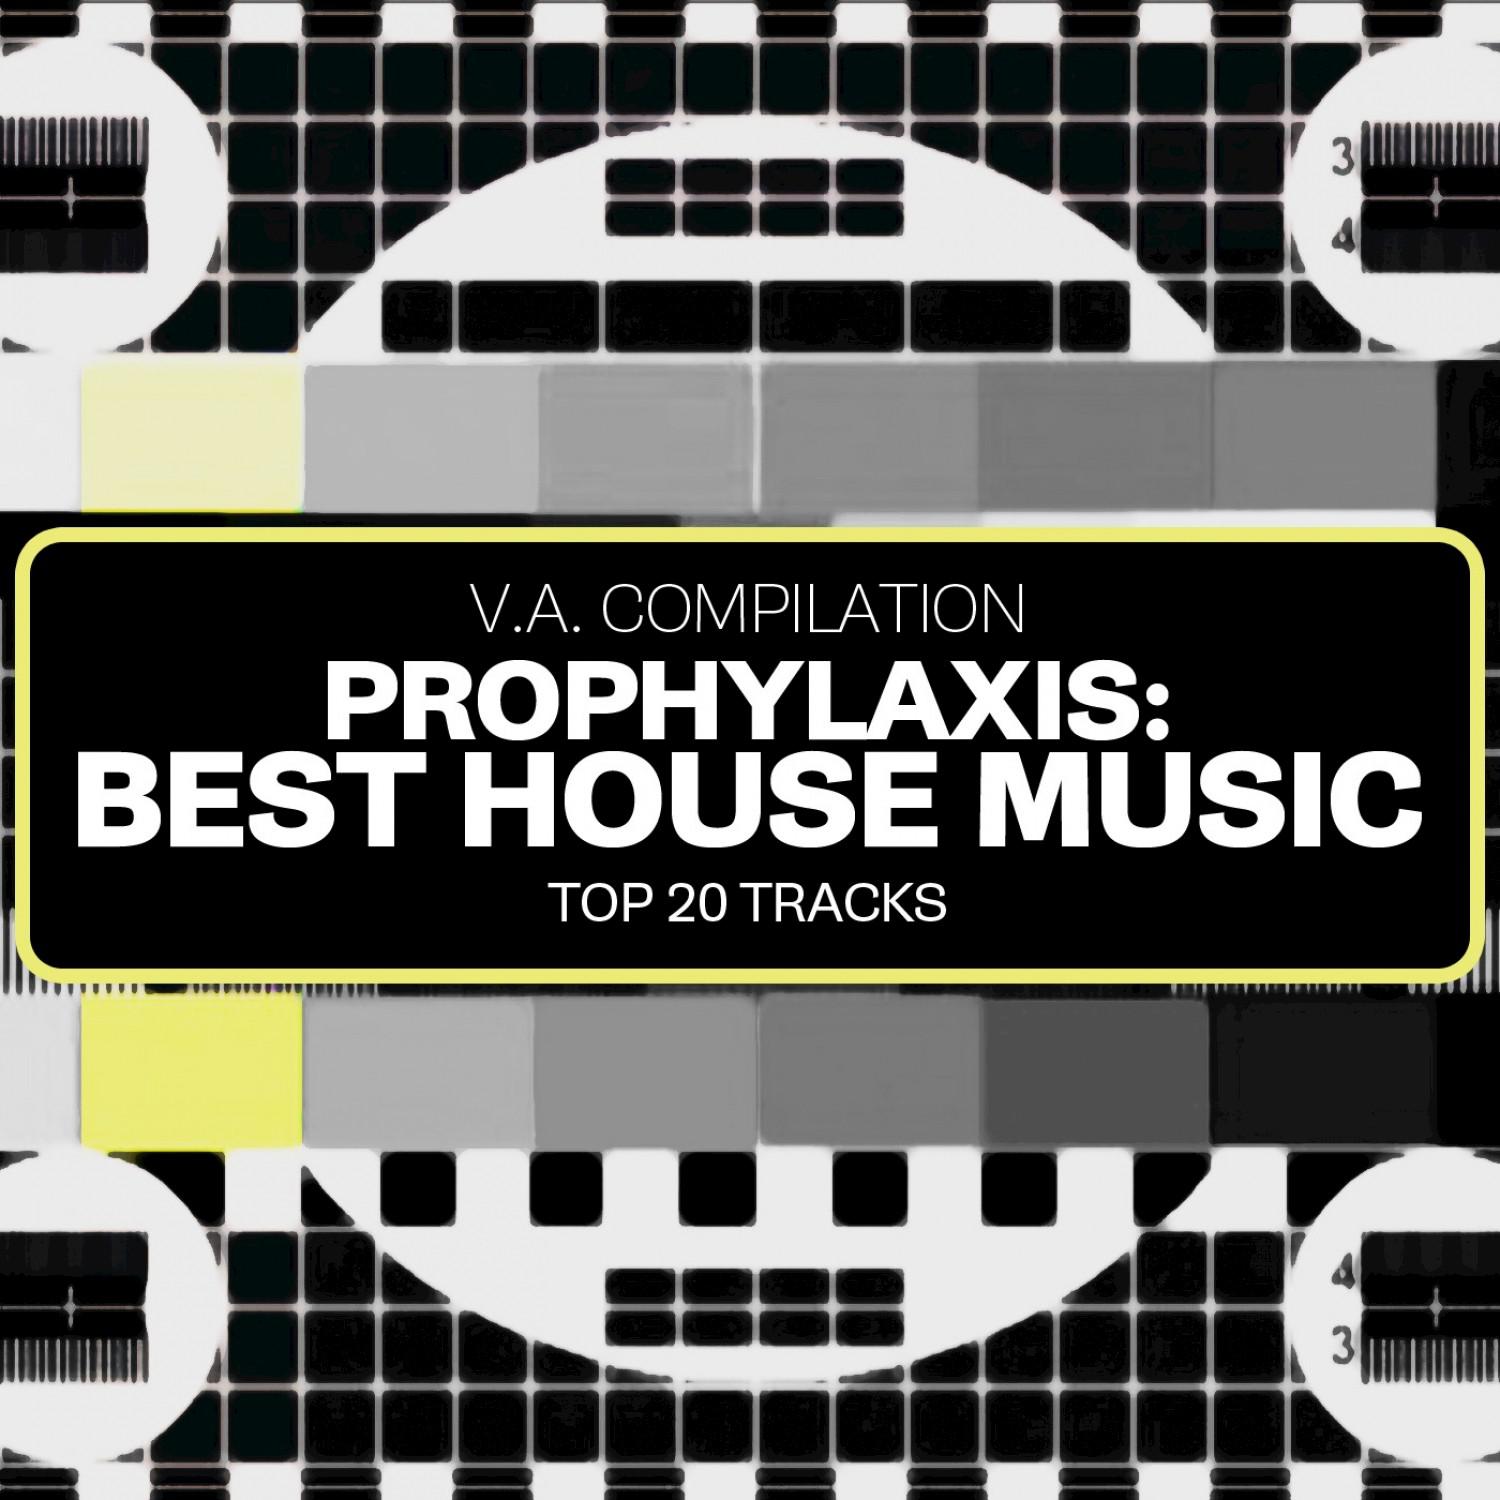 Prophylaxis: Best House Music